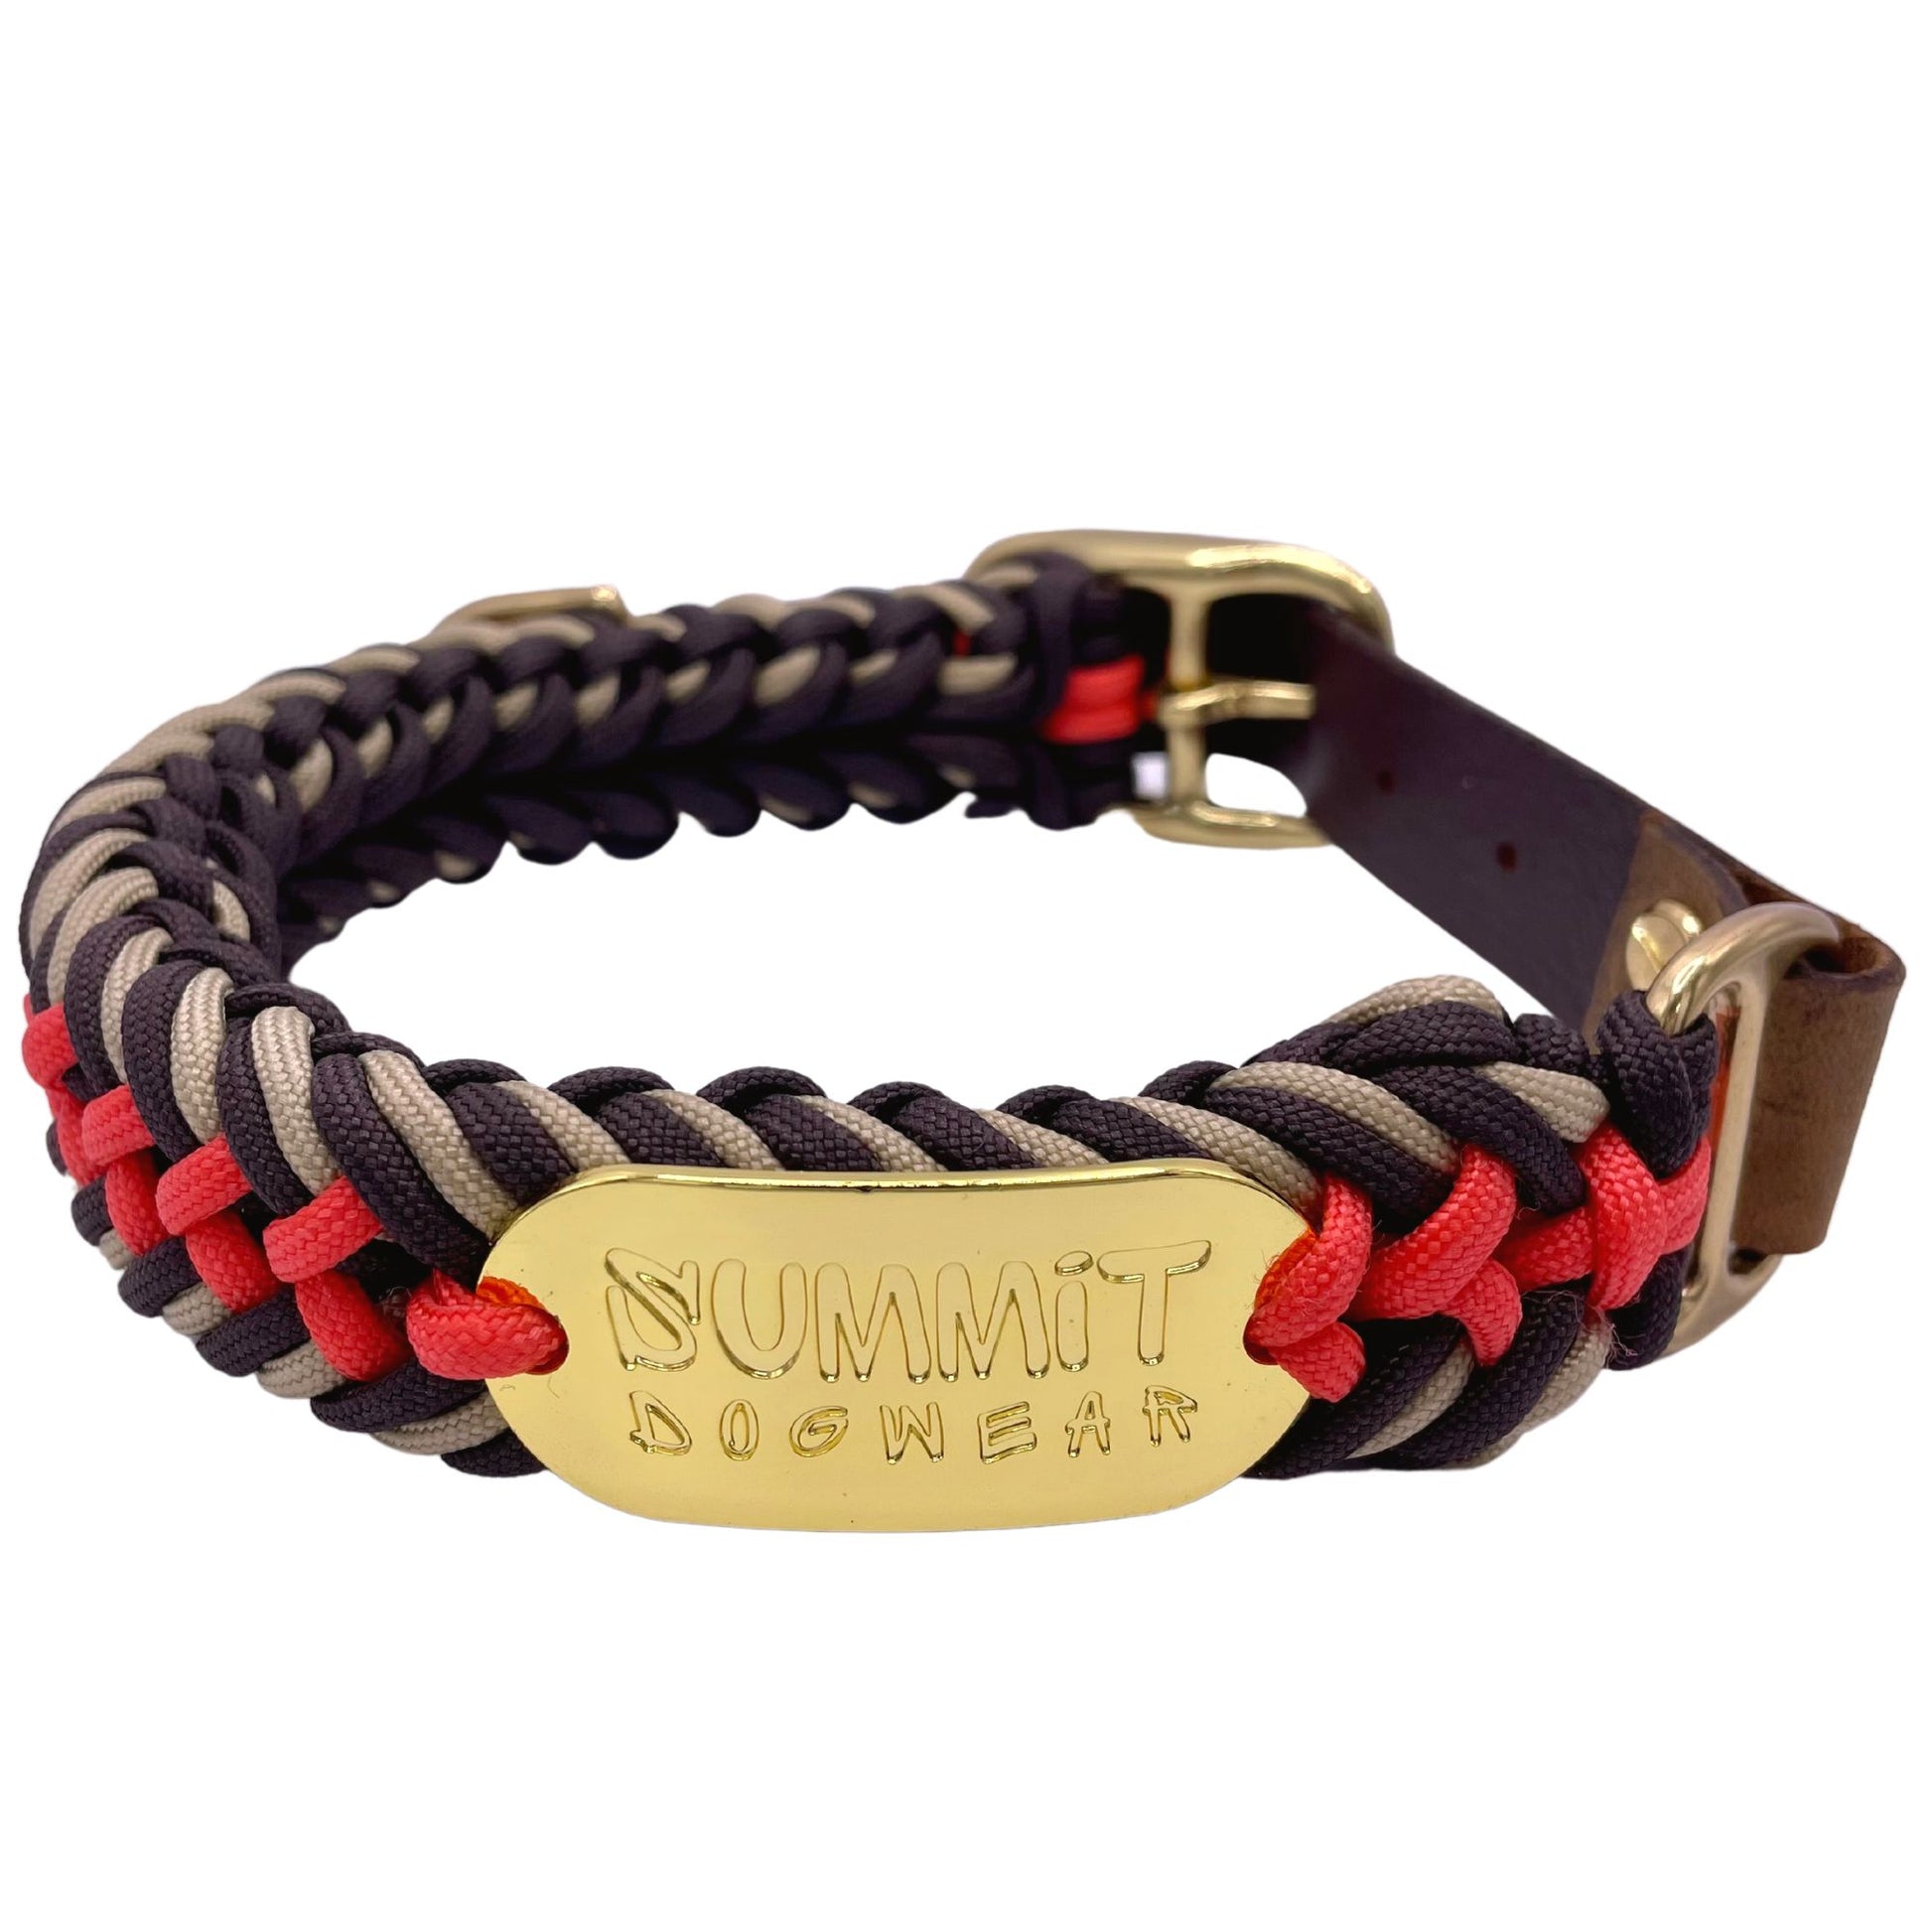 Retro Summer Paracord Dog Collar with Leather or Biothane Belt and Gold hardware